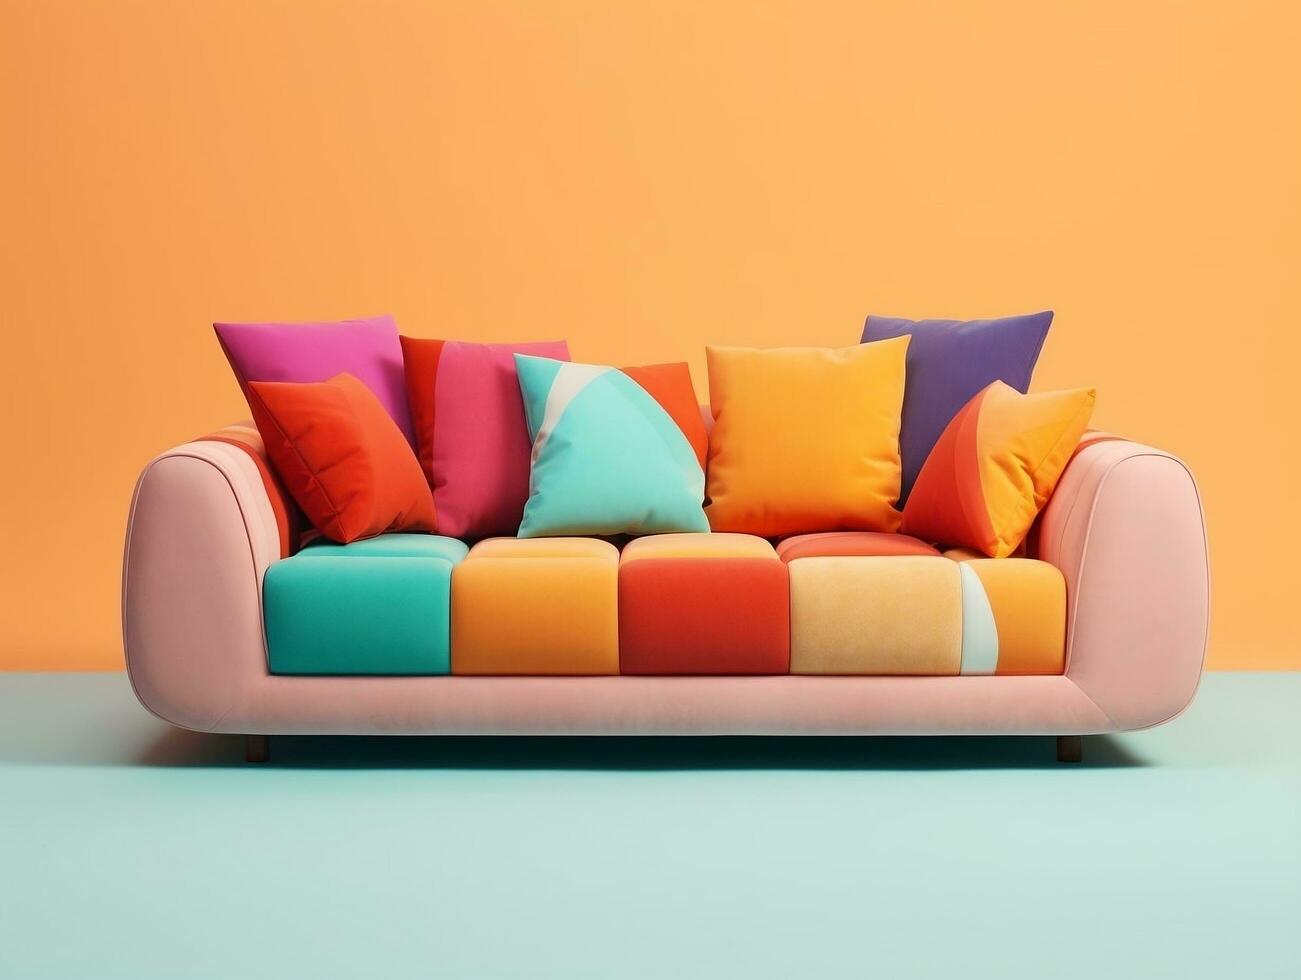 Colorful couch with colorful pillows on a light pink background AI Generative photo